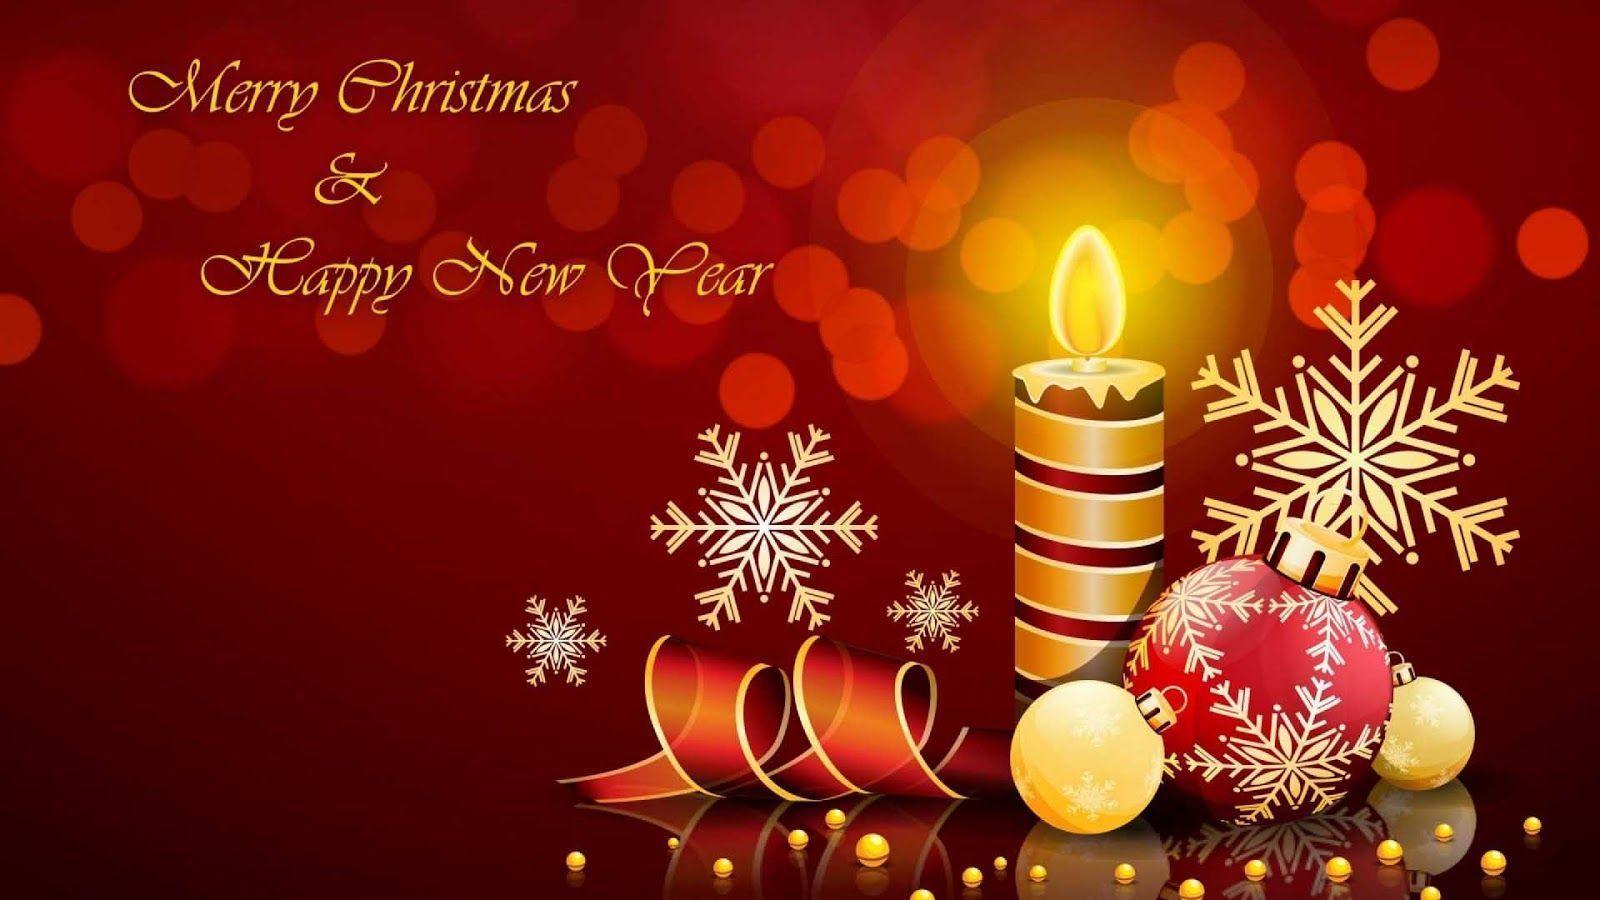 Merry Christmas & Happy New Year 2016 HD Wallpaper Image